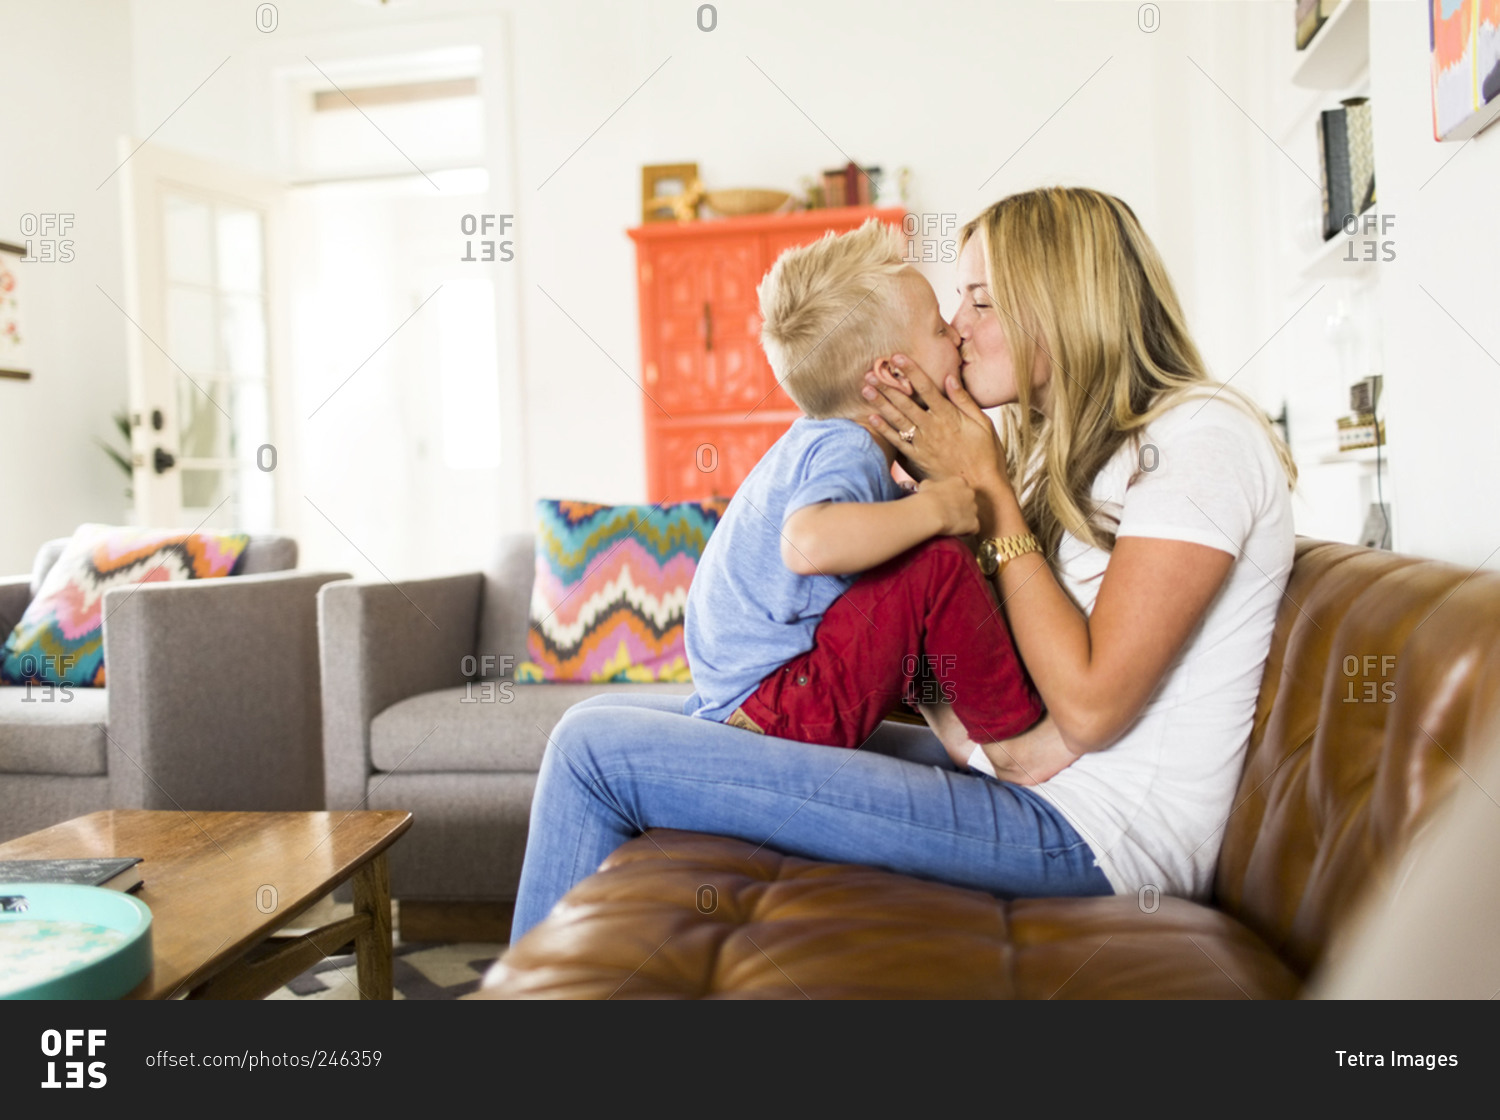 bonnie larrimore recommends mom and son on couch pic